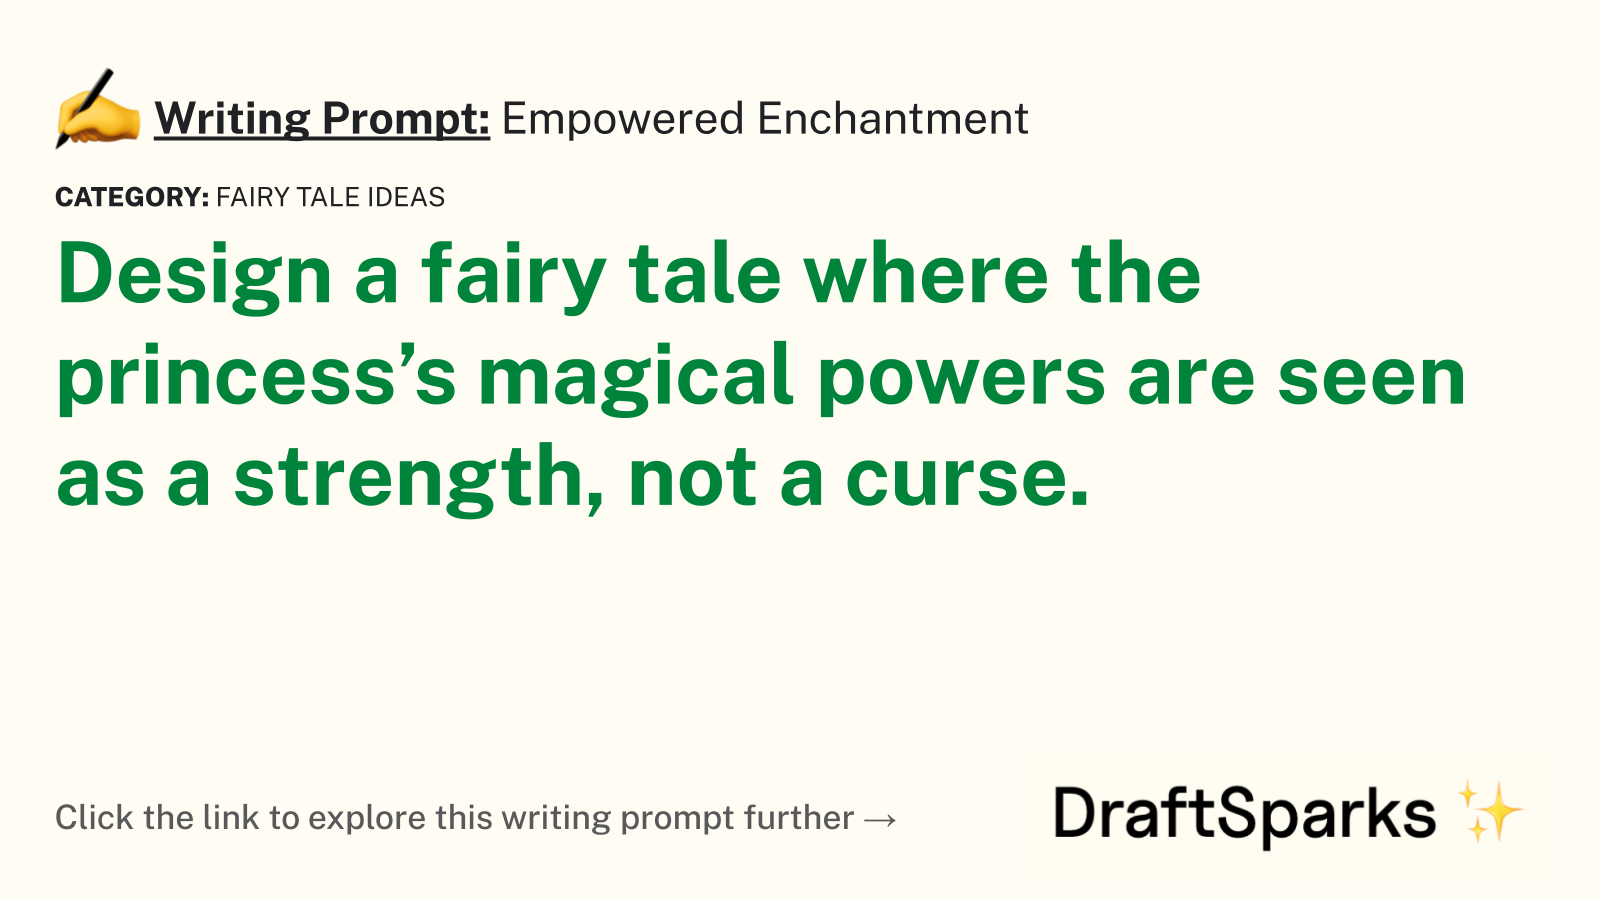 Empowered Enchantment